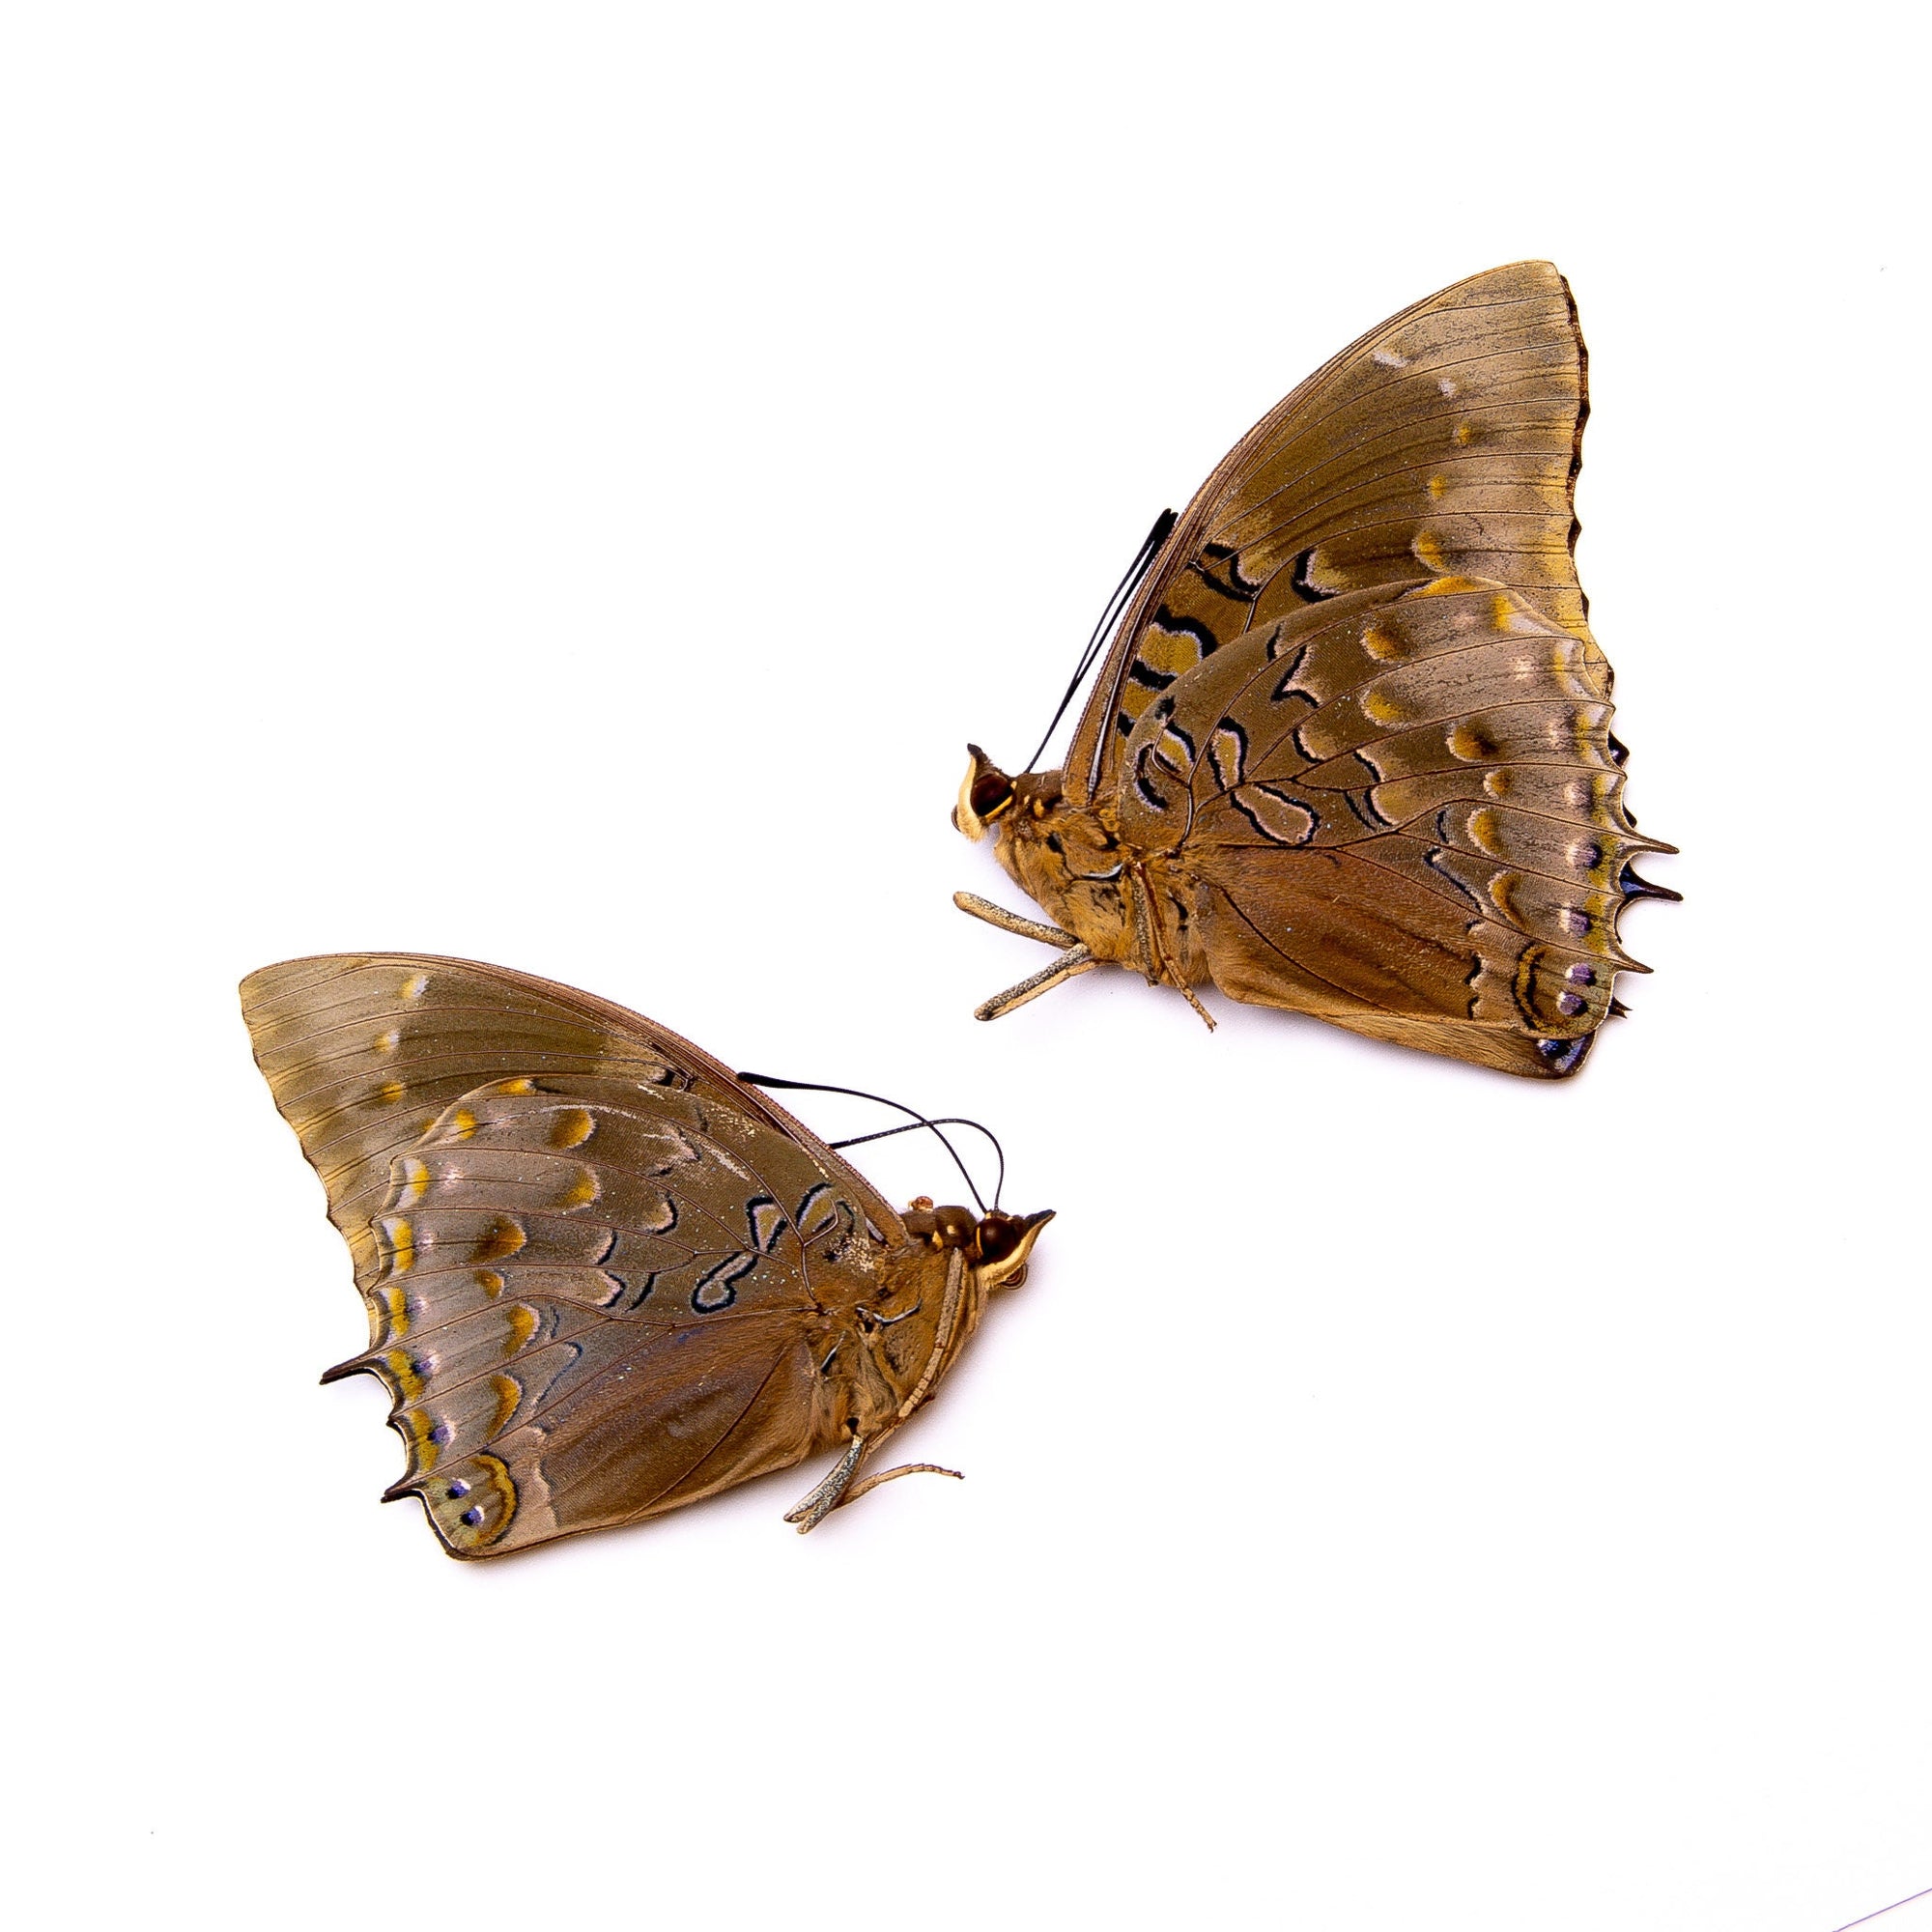 TWO (2) Charaxes mixtus | A1 Real Dry-Preserved Butterflies | Unmounted Entomology Taxidermy Specimens